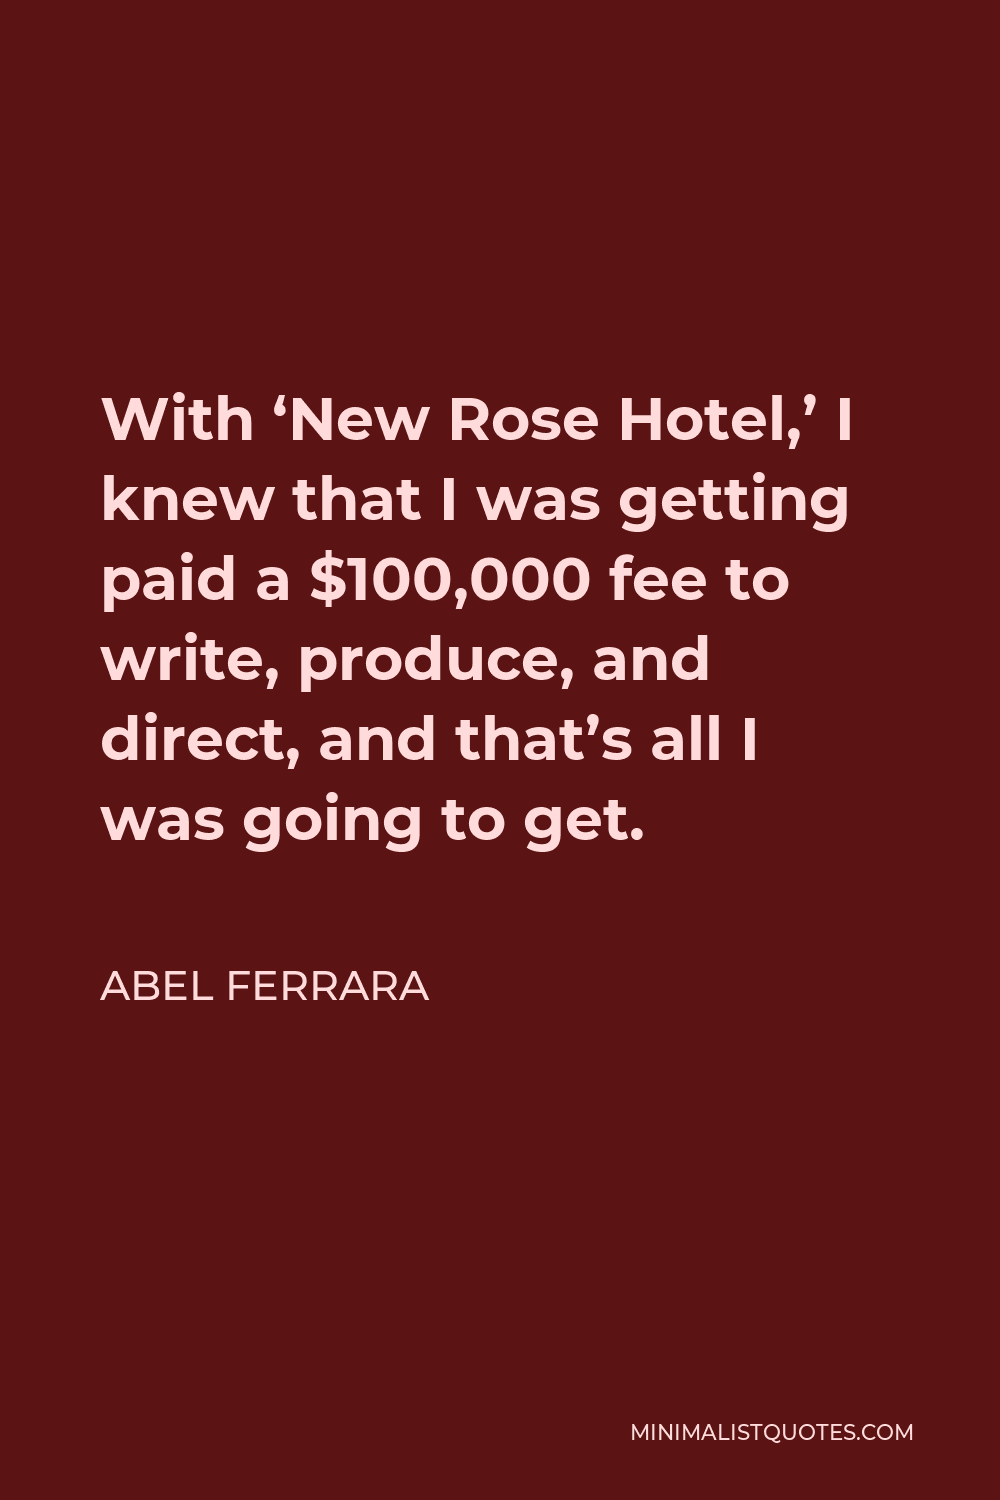 Abel Ferrara Quote - With ‘New Rose Hotel,’ I knew that I was getting paid a $100,000 fee to write, produce, and direct, and that’s all I was going to get.